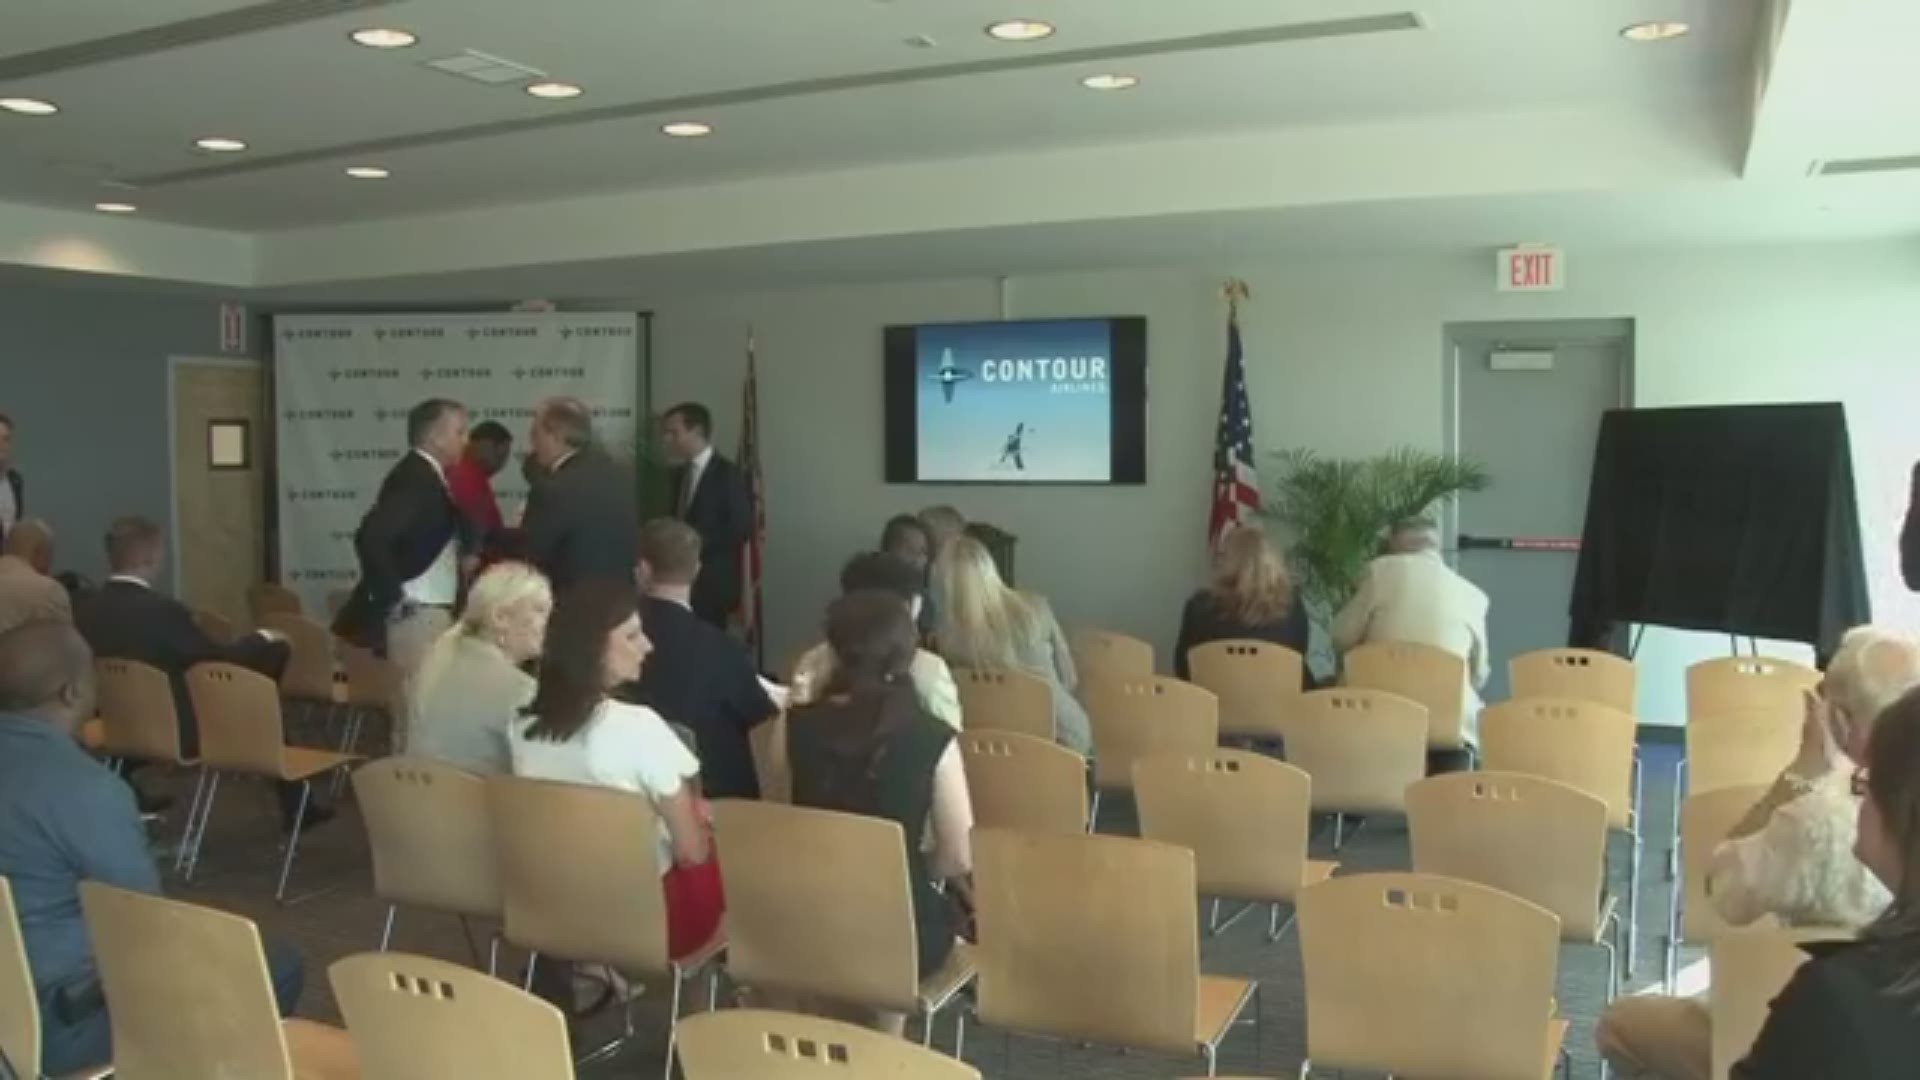 Nonstop flight service from Macon to Tampa was announced at a press conference Wednesday